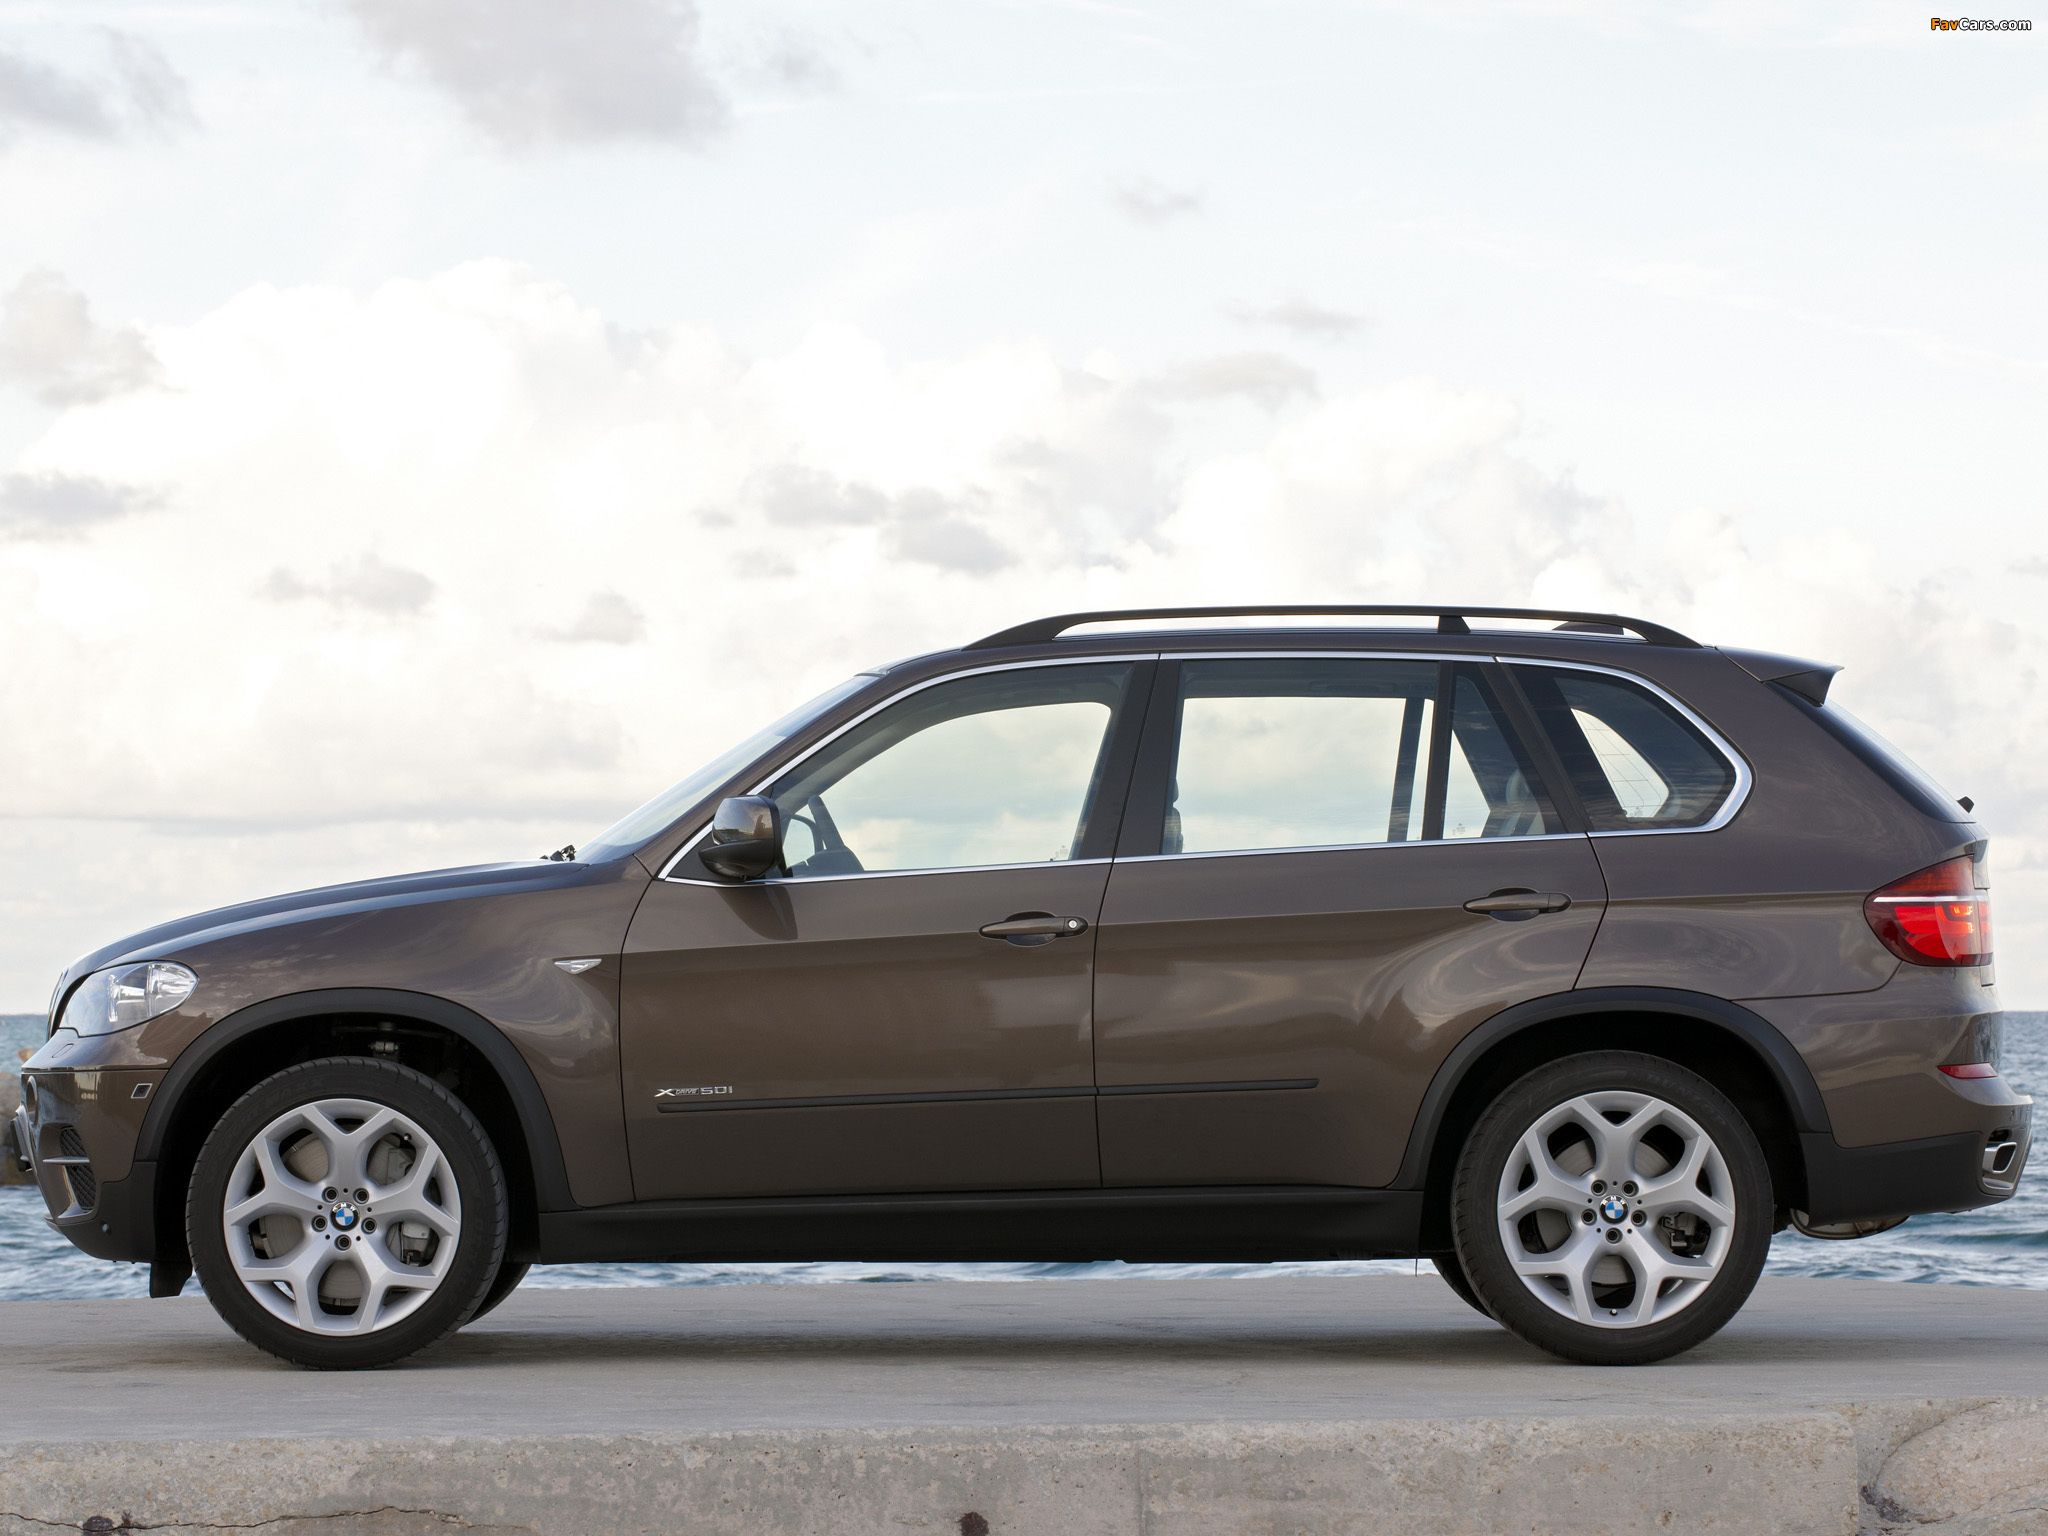 BMW X5 xDrive50i (E70) 2010 pictures (2048 x 1536)